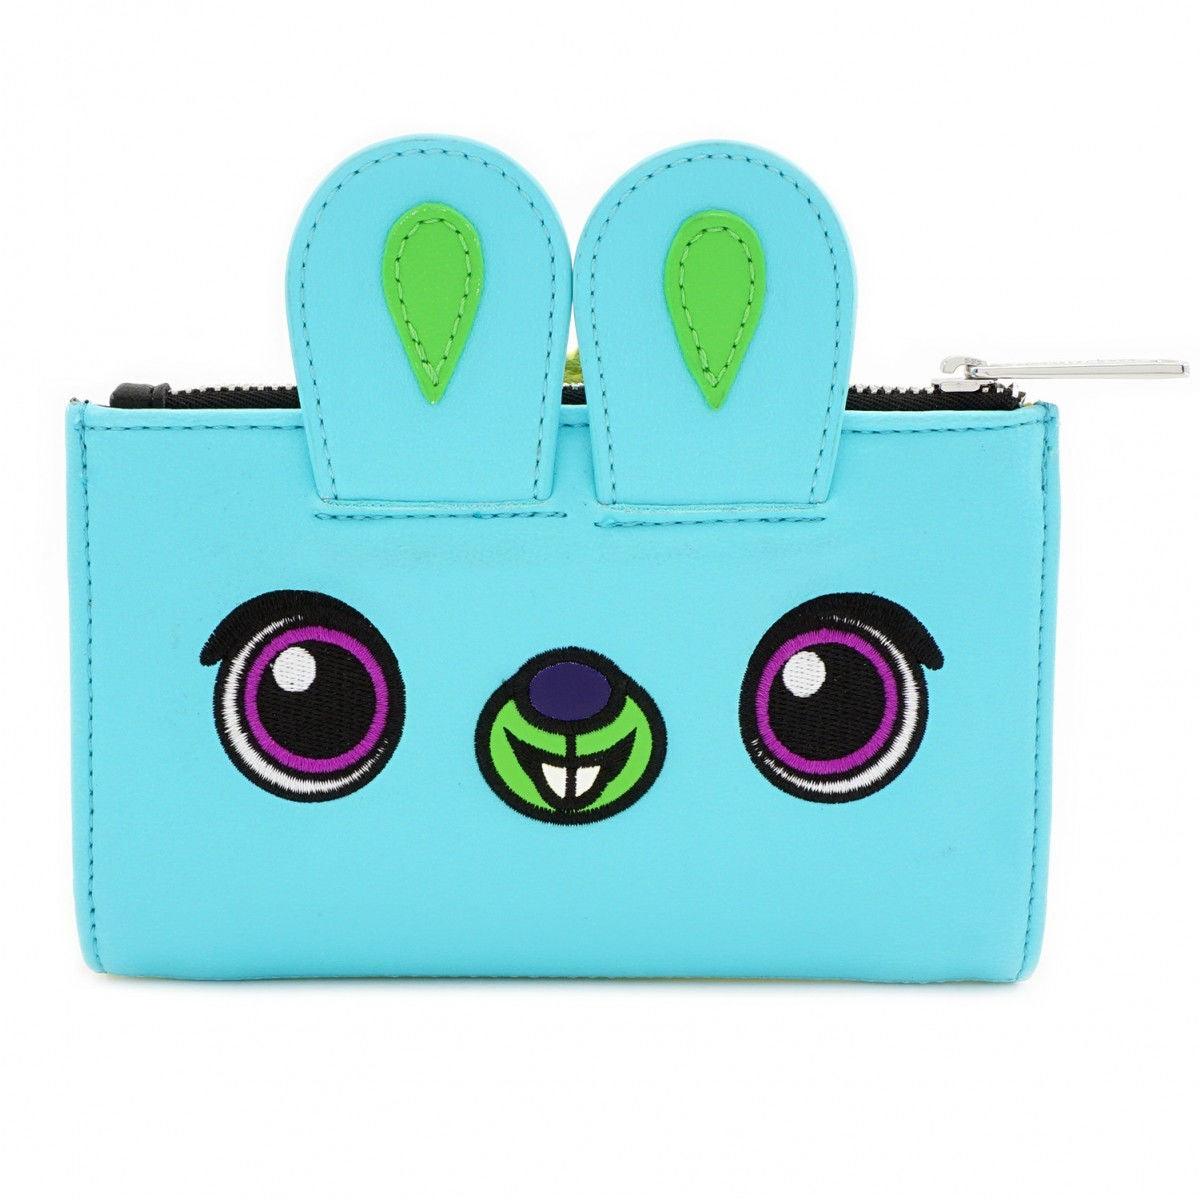 Toy Story 4 - Ducky / Bunny Purse Purse by Loungefly | Titan Pop Culture